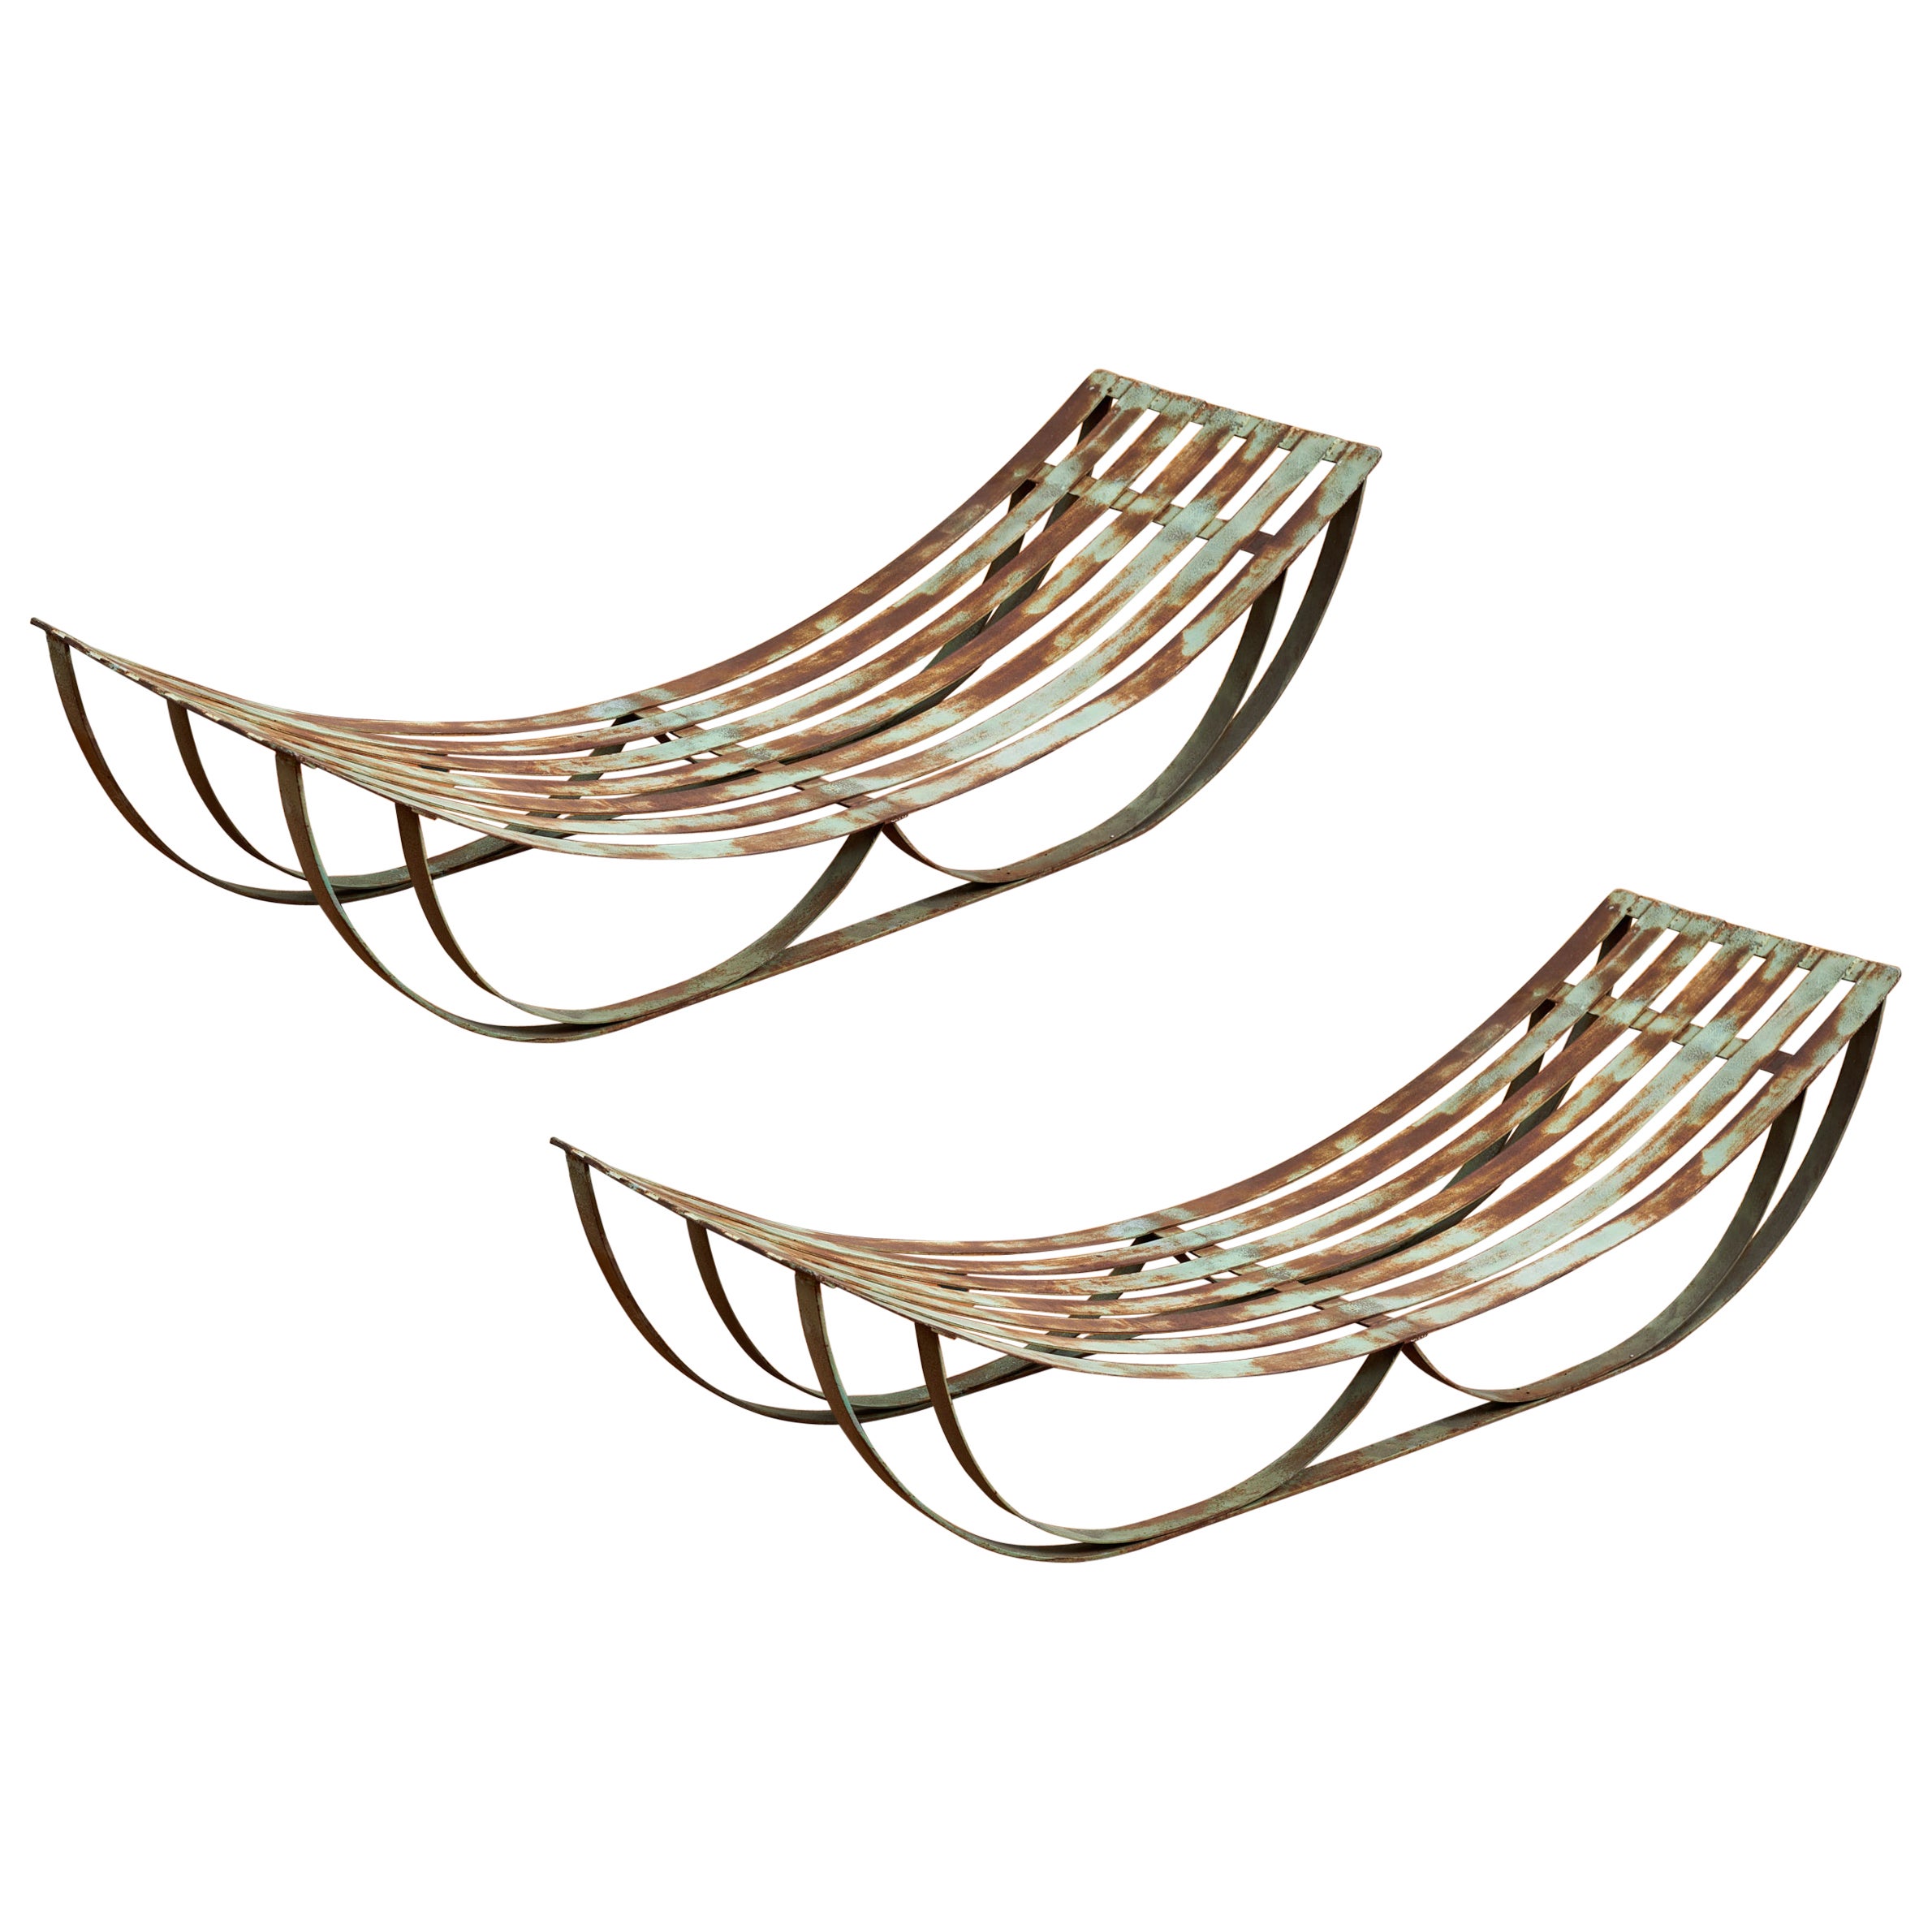 Circa 1950 French Sculptural Steel Lounges Pair For Sale